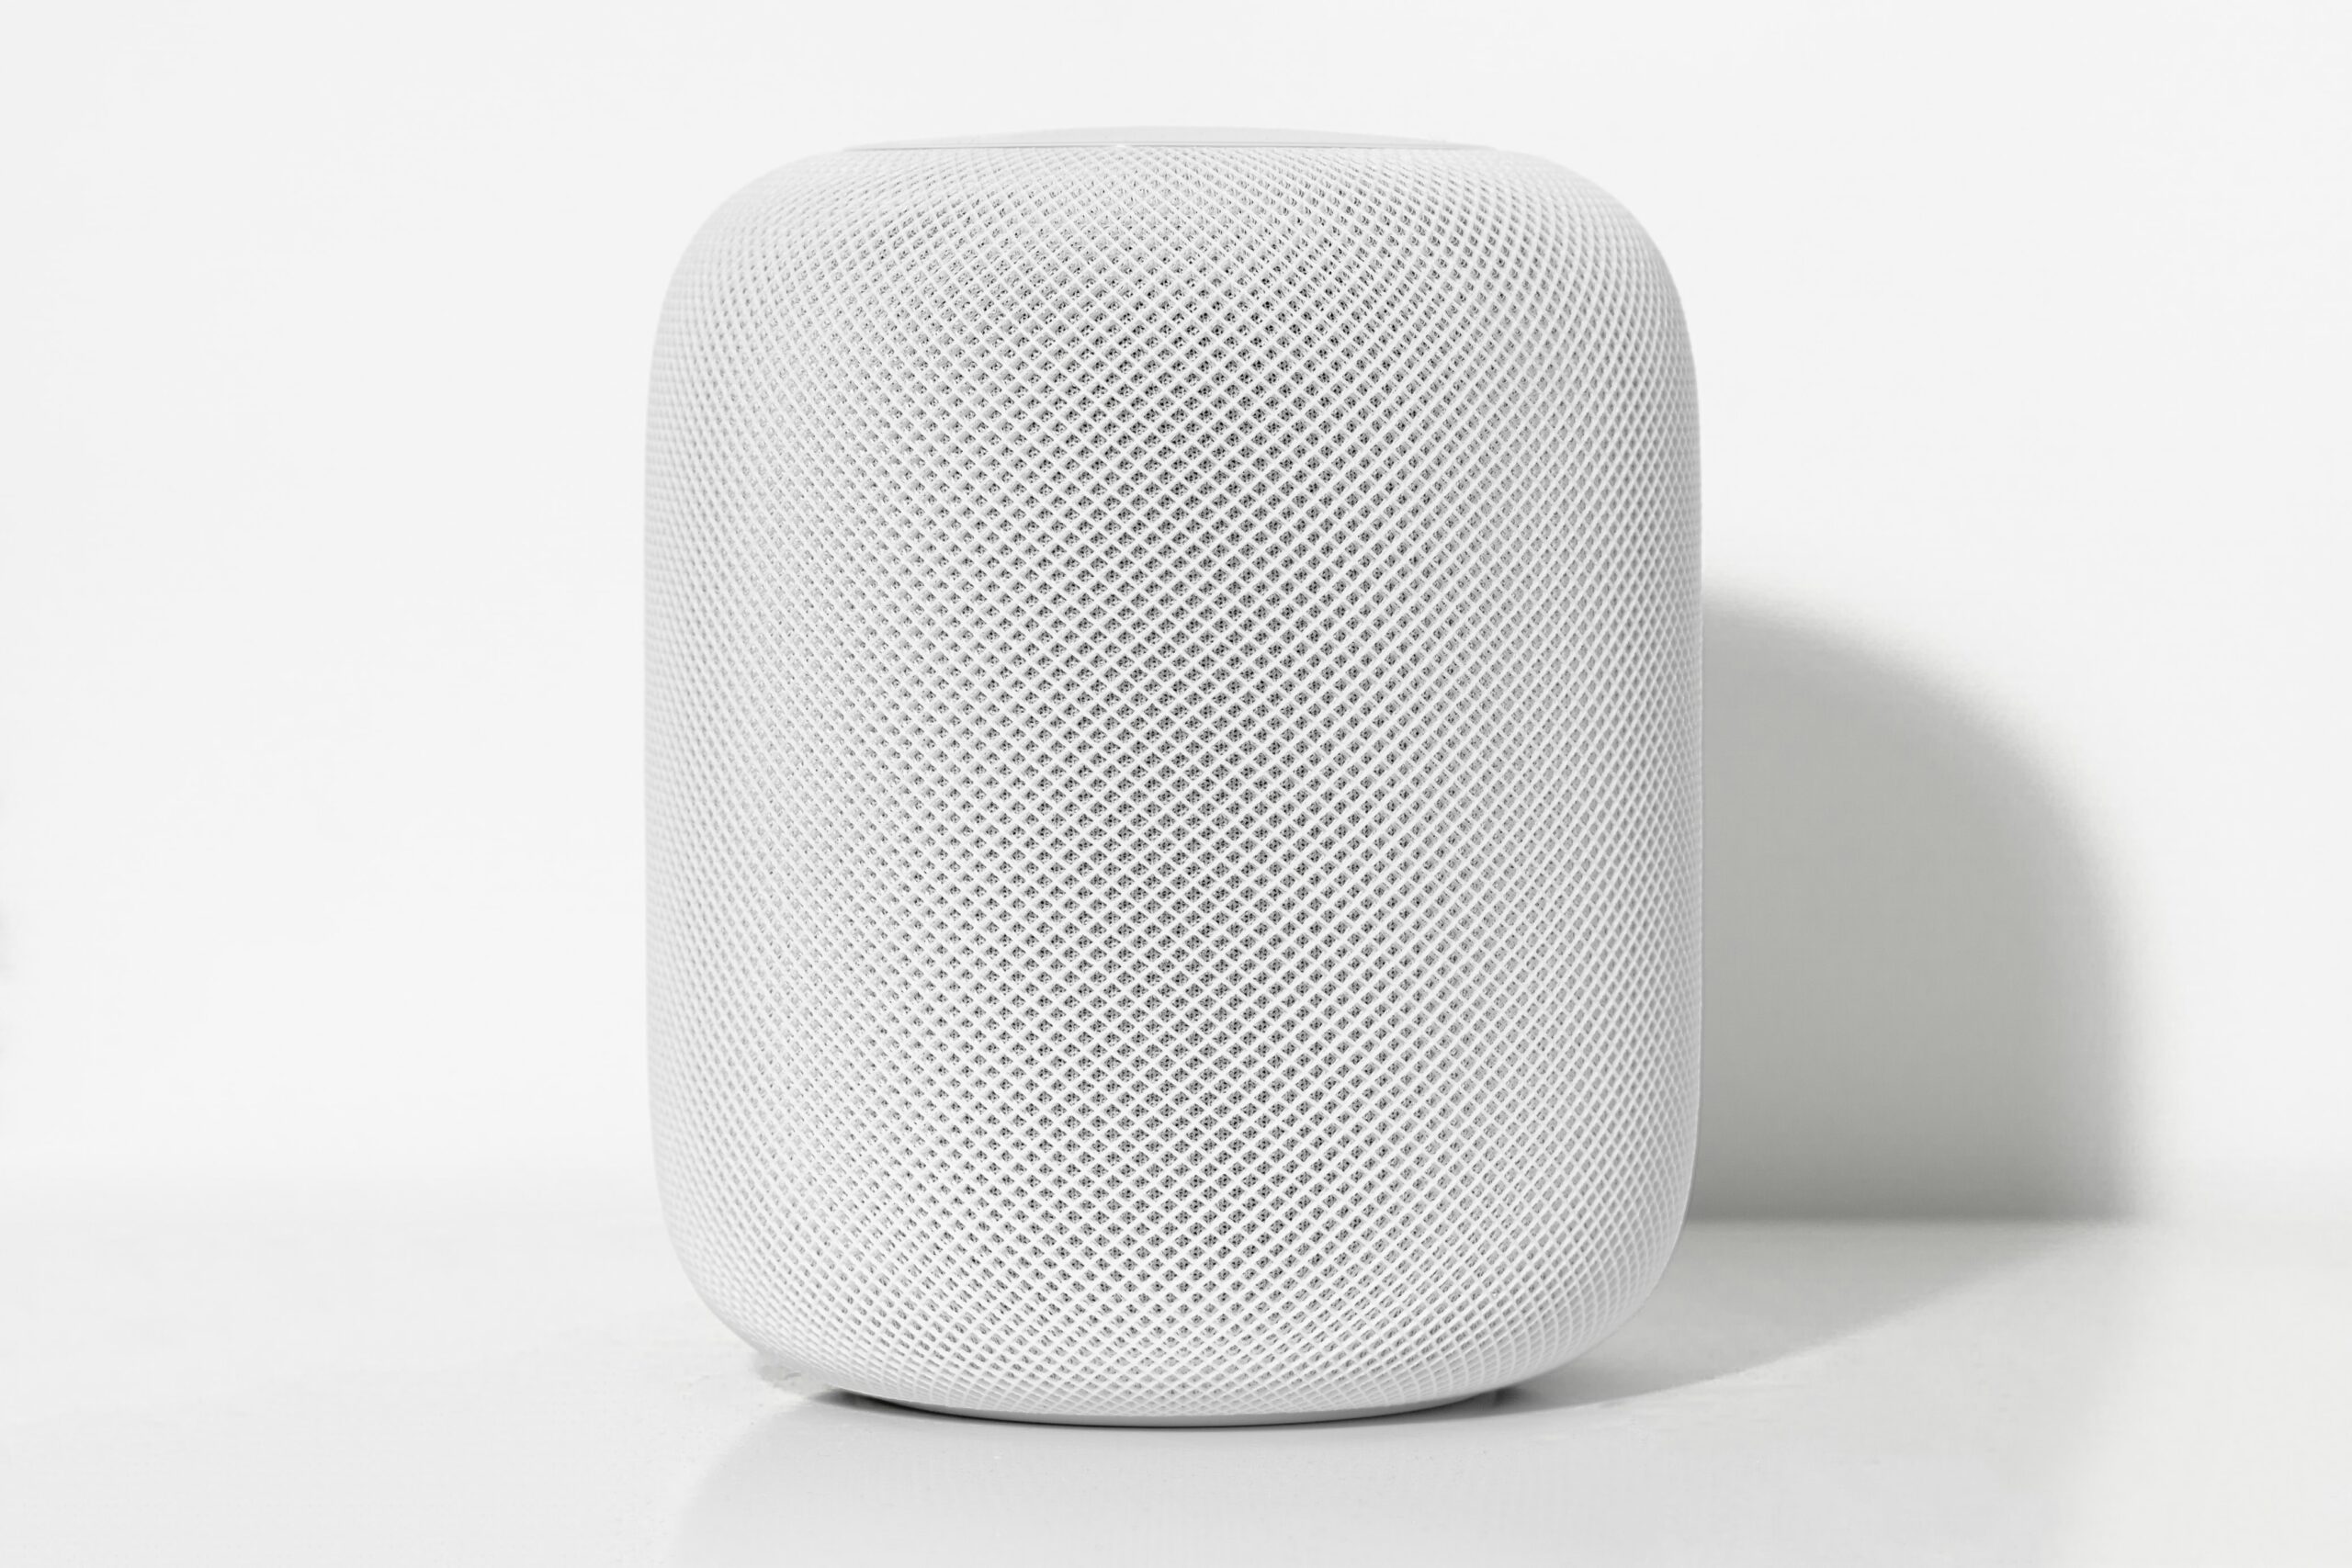 How to Check HomePod Model & Serial Number